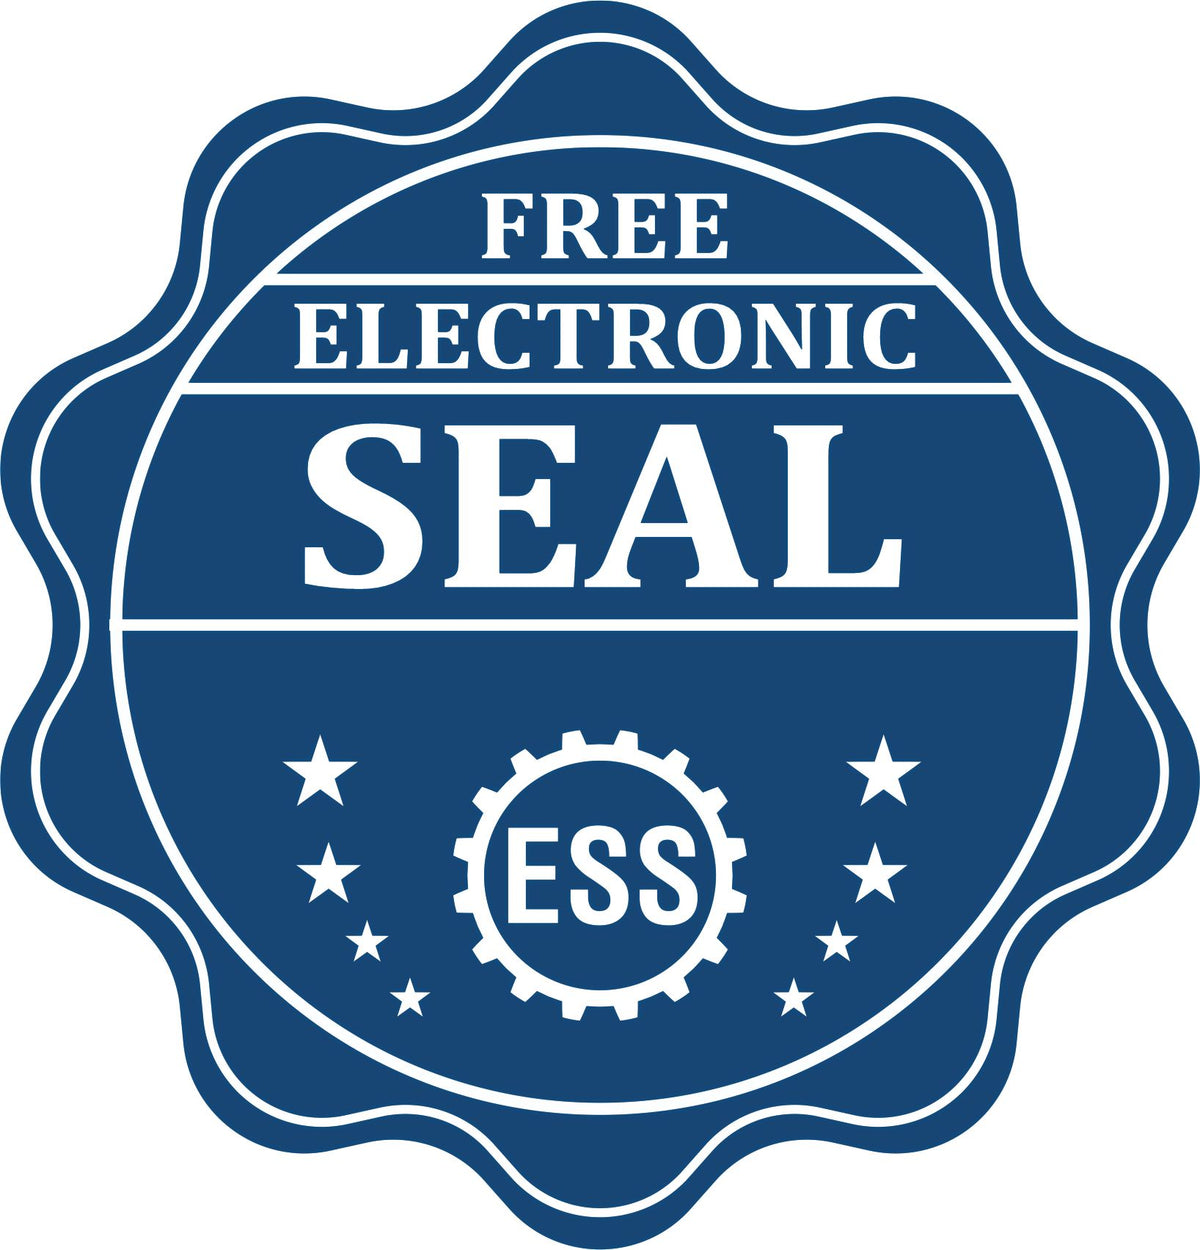 A badge showing a free electronic seal for the Premium MaxLight Pre-Inked Wyoming Engineering Stamp with stars and the ESS gear on the emblem.